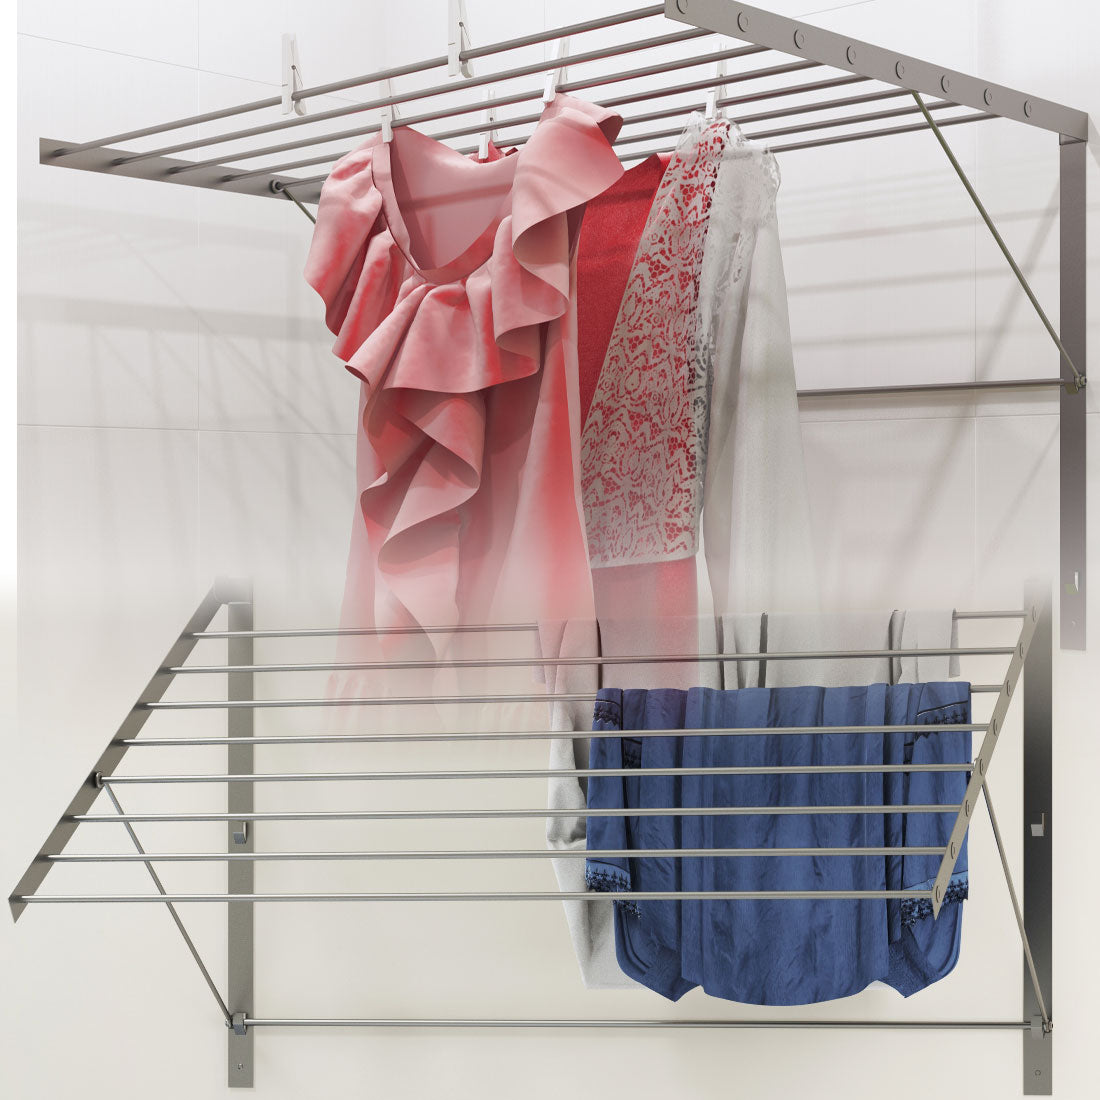 ATYUJKB Clothes Drying Rack Folding Outdoor, Laundry Stand Organizer with  Wheels, Clothes Storage Rack for Indoor Outdoor, Stainless Steel 5 Rod